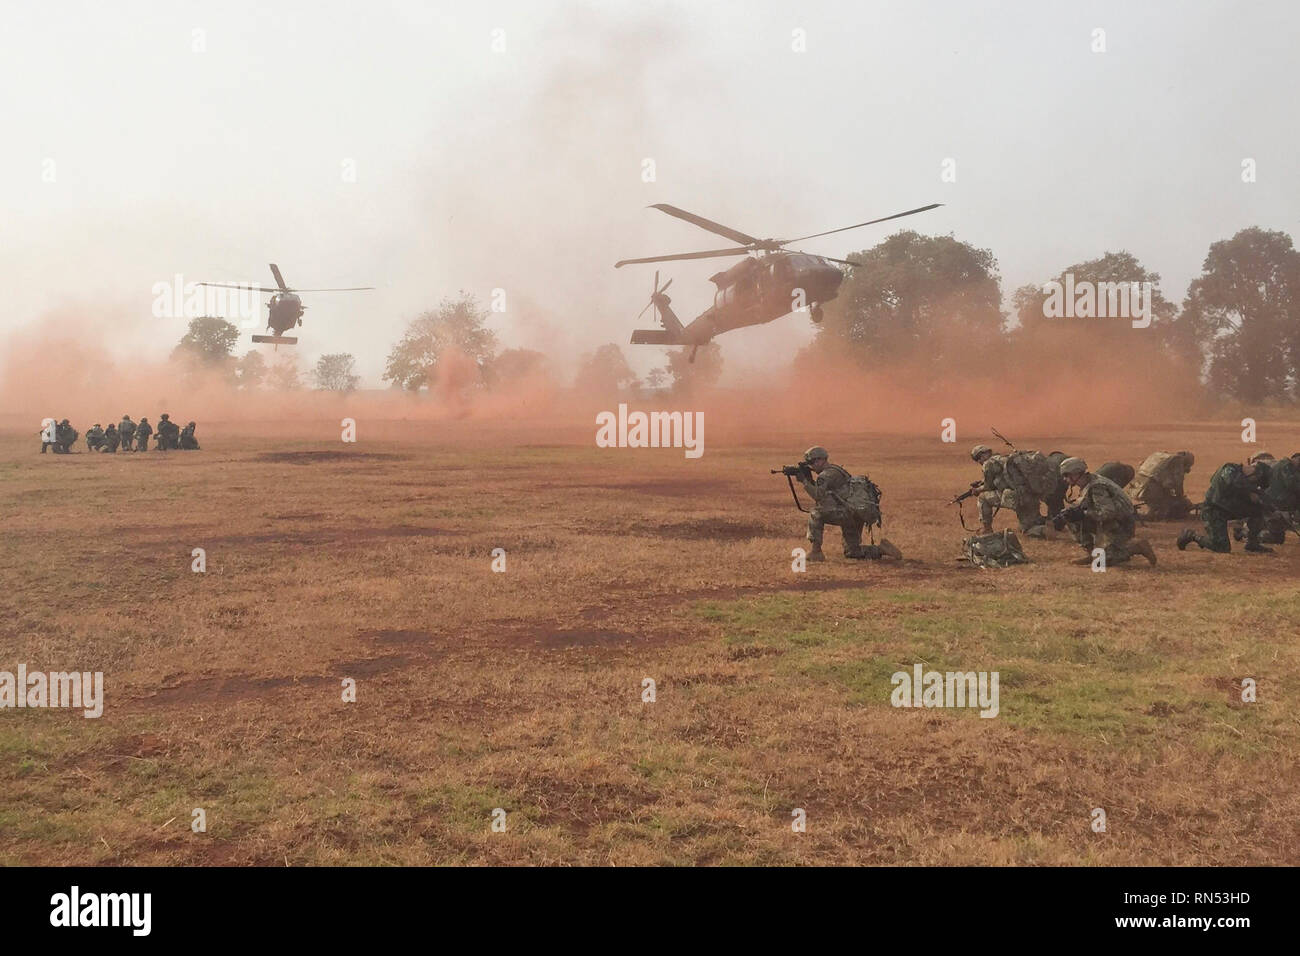 Soldiers with 5th Battalion, 20th Infantry Regiment, secure a landing zone with their Royal Thai Army counterparts as Sikorsky UH-60 Black Hawks move to the next lift location at Phitsanulok Province, Thailand, Feb. 12, 2019. This was part of Cobra Gold 19, an exercise designed to advance regional security and ensure effective responses to regional crises by bringing together a robust multinational force to address shared goals and security commitments in the Indo-Pacific. (Photo courtesy of U.S. Army) Stock Photo